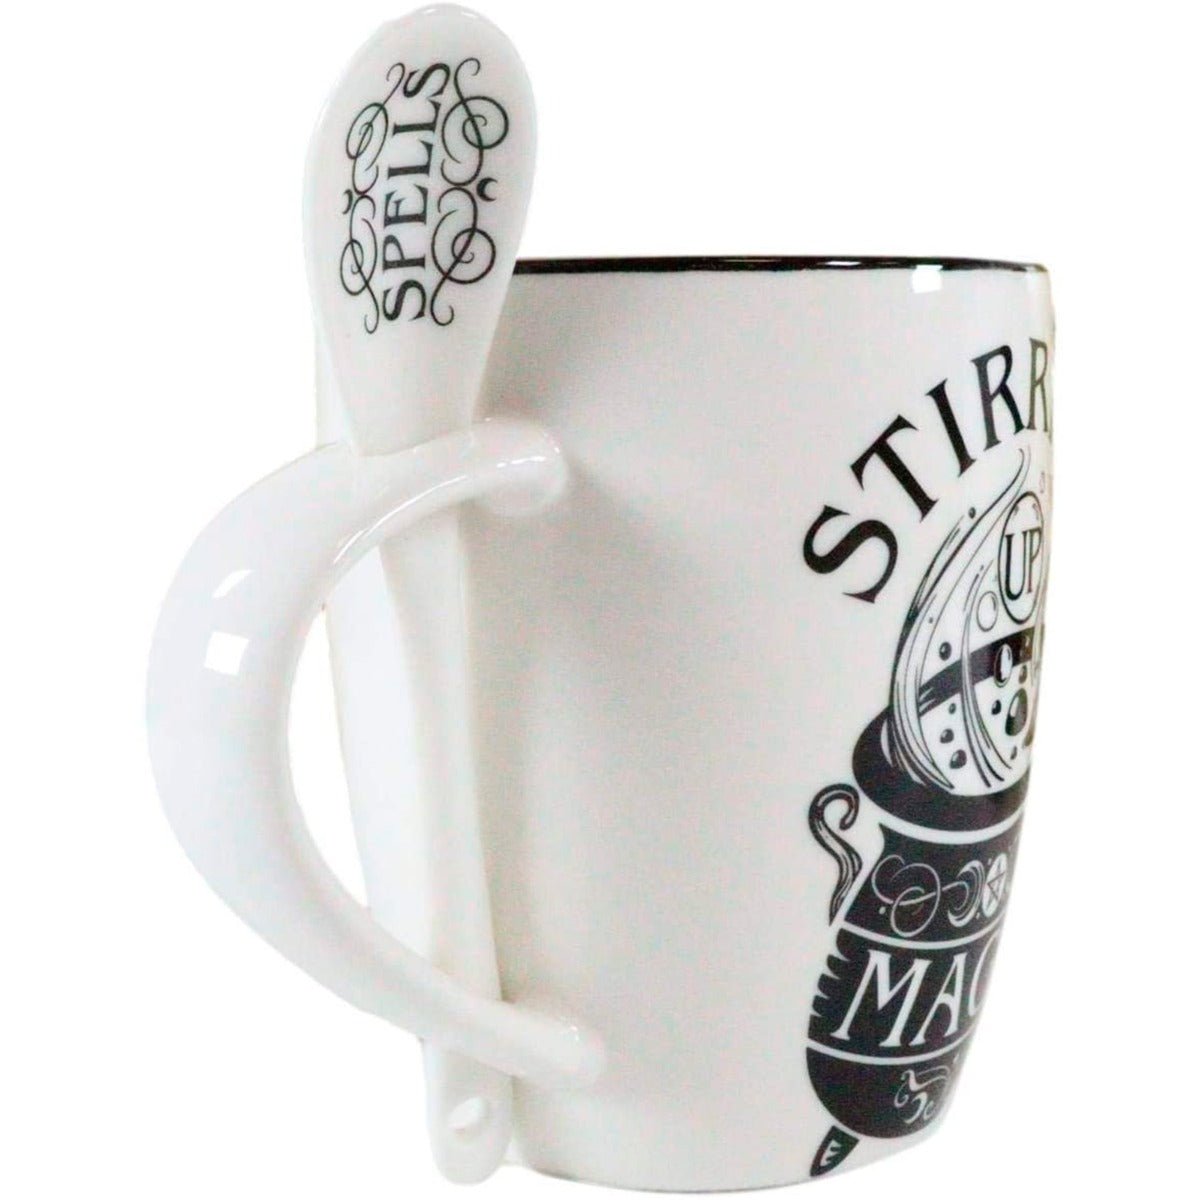 Stirring Up Magic Cup and Spoon Set - 13 Moons